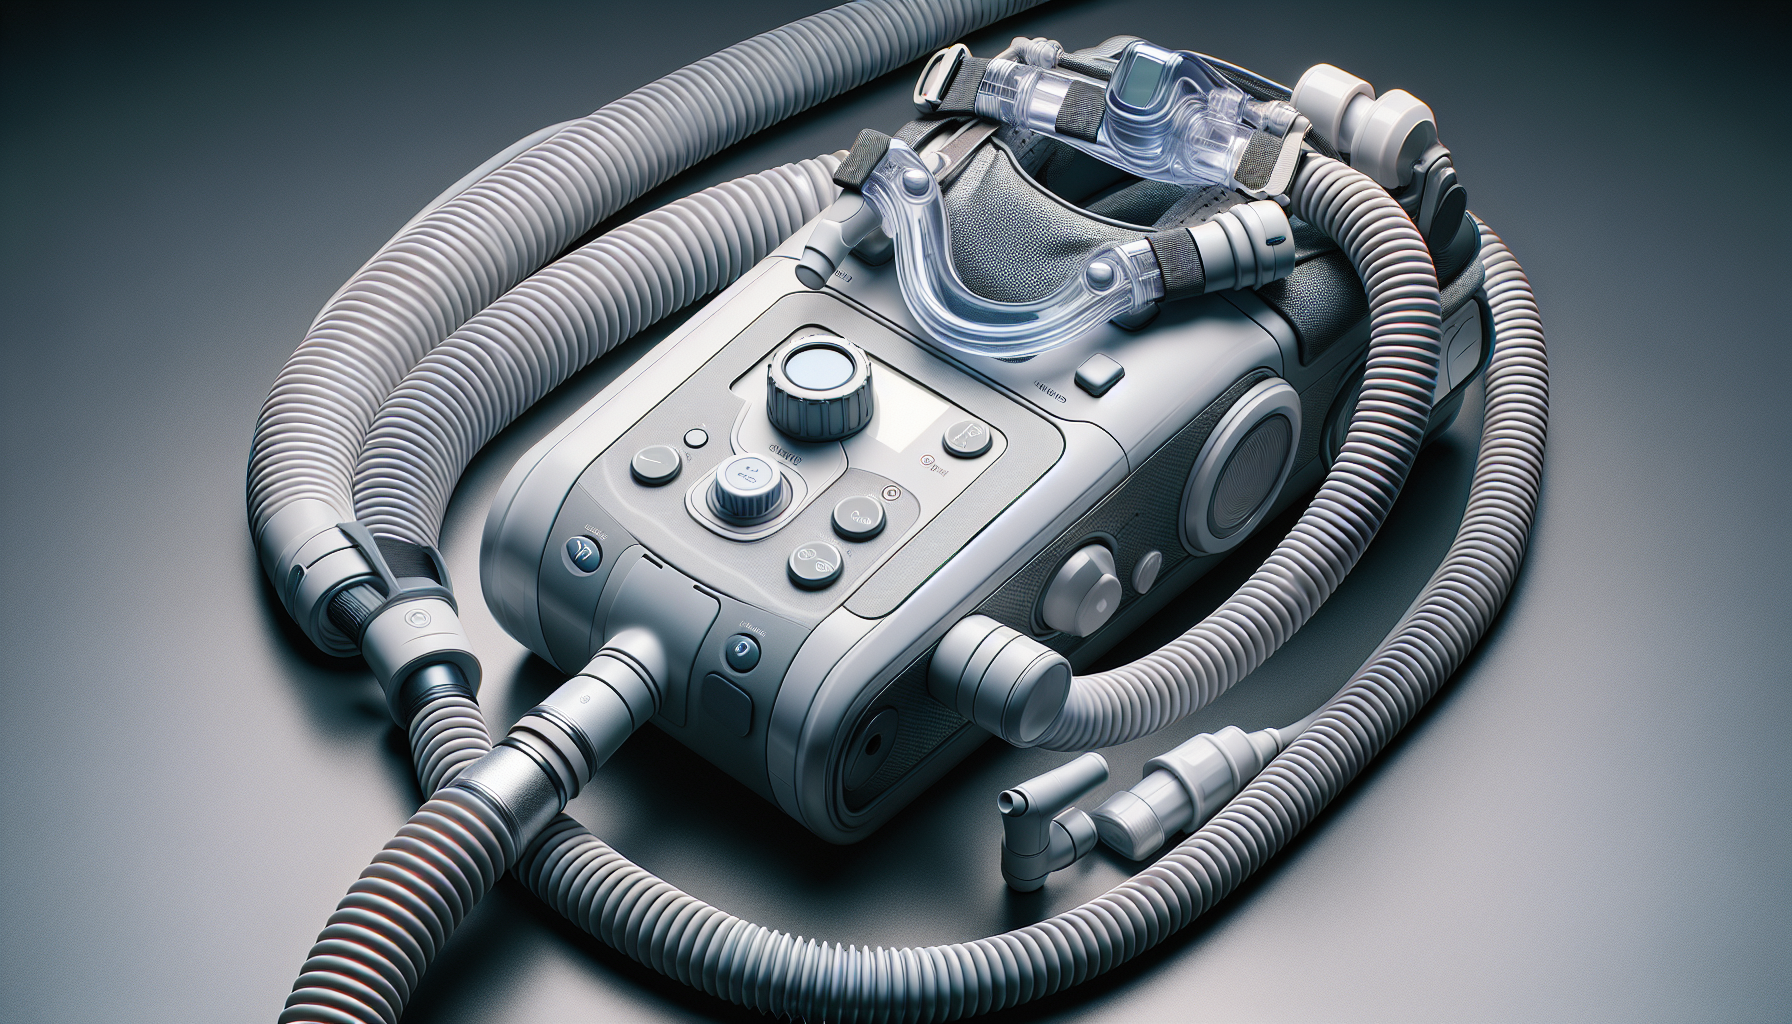 Can I Just Buy A CPAP Machine?